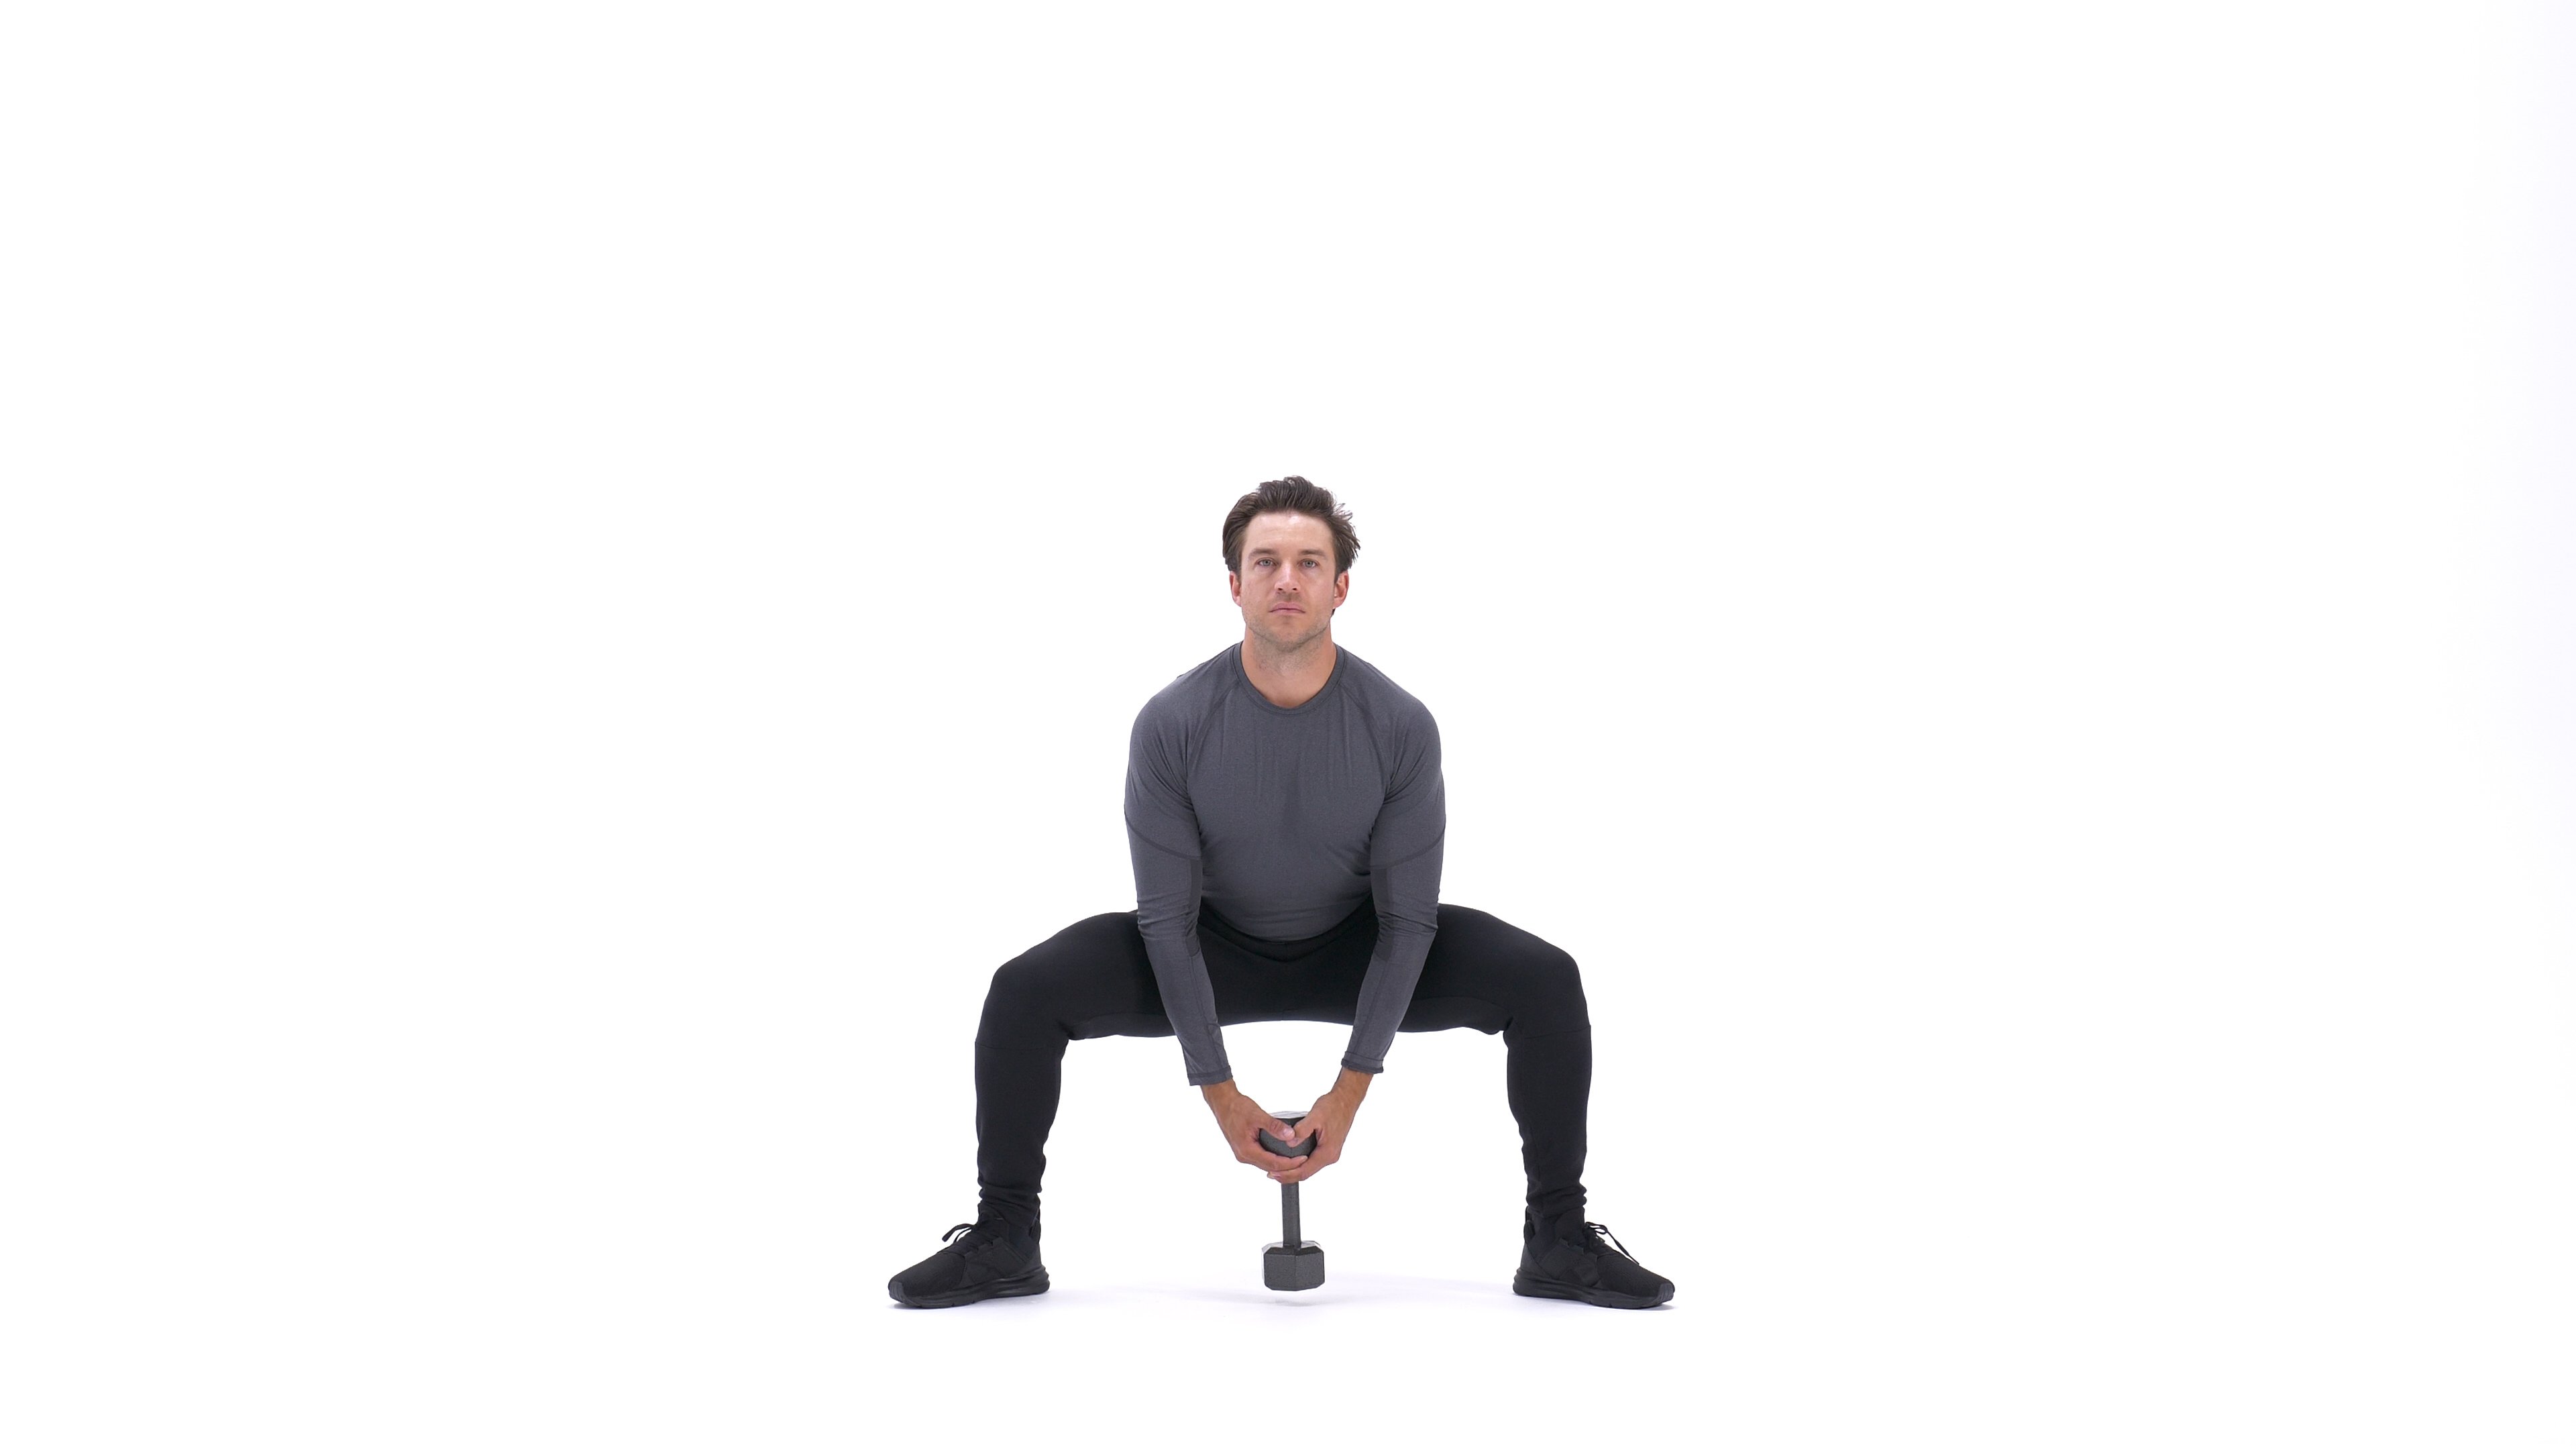 How To Do The Dumbbell Sumo Squat And Press Men's Health | vlr.eng.br